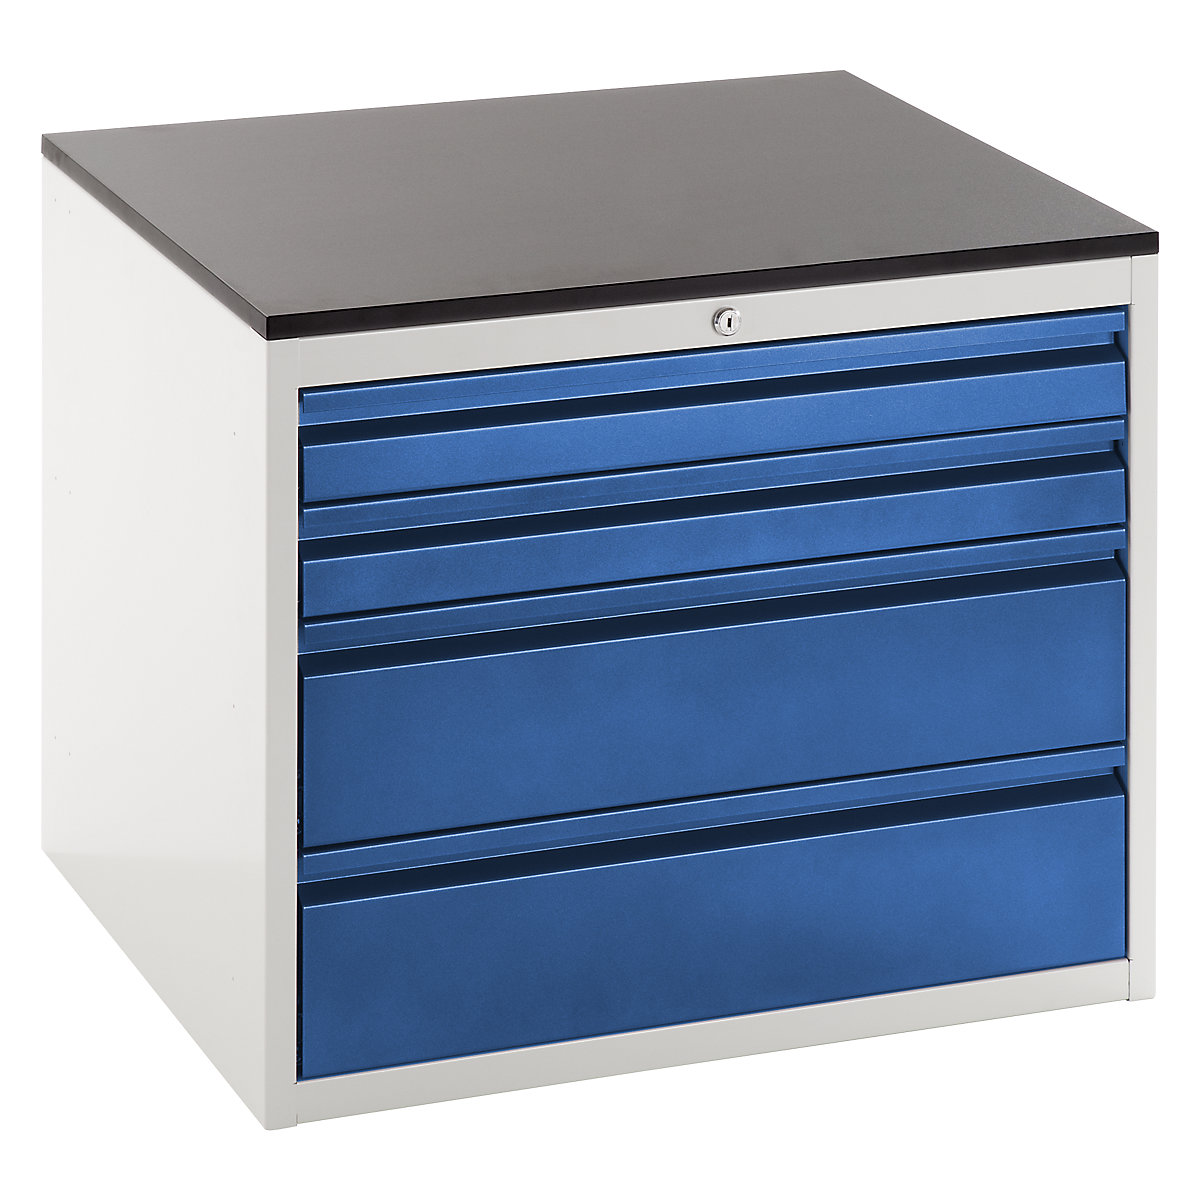 Drawer cupboard with telescopic guides – RAU, height 640 mm, drawers: 2 x 90, 2 x 180 mm, light grey / gentian blue, width 770 mm-3